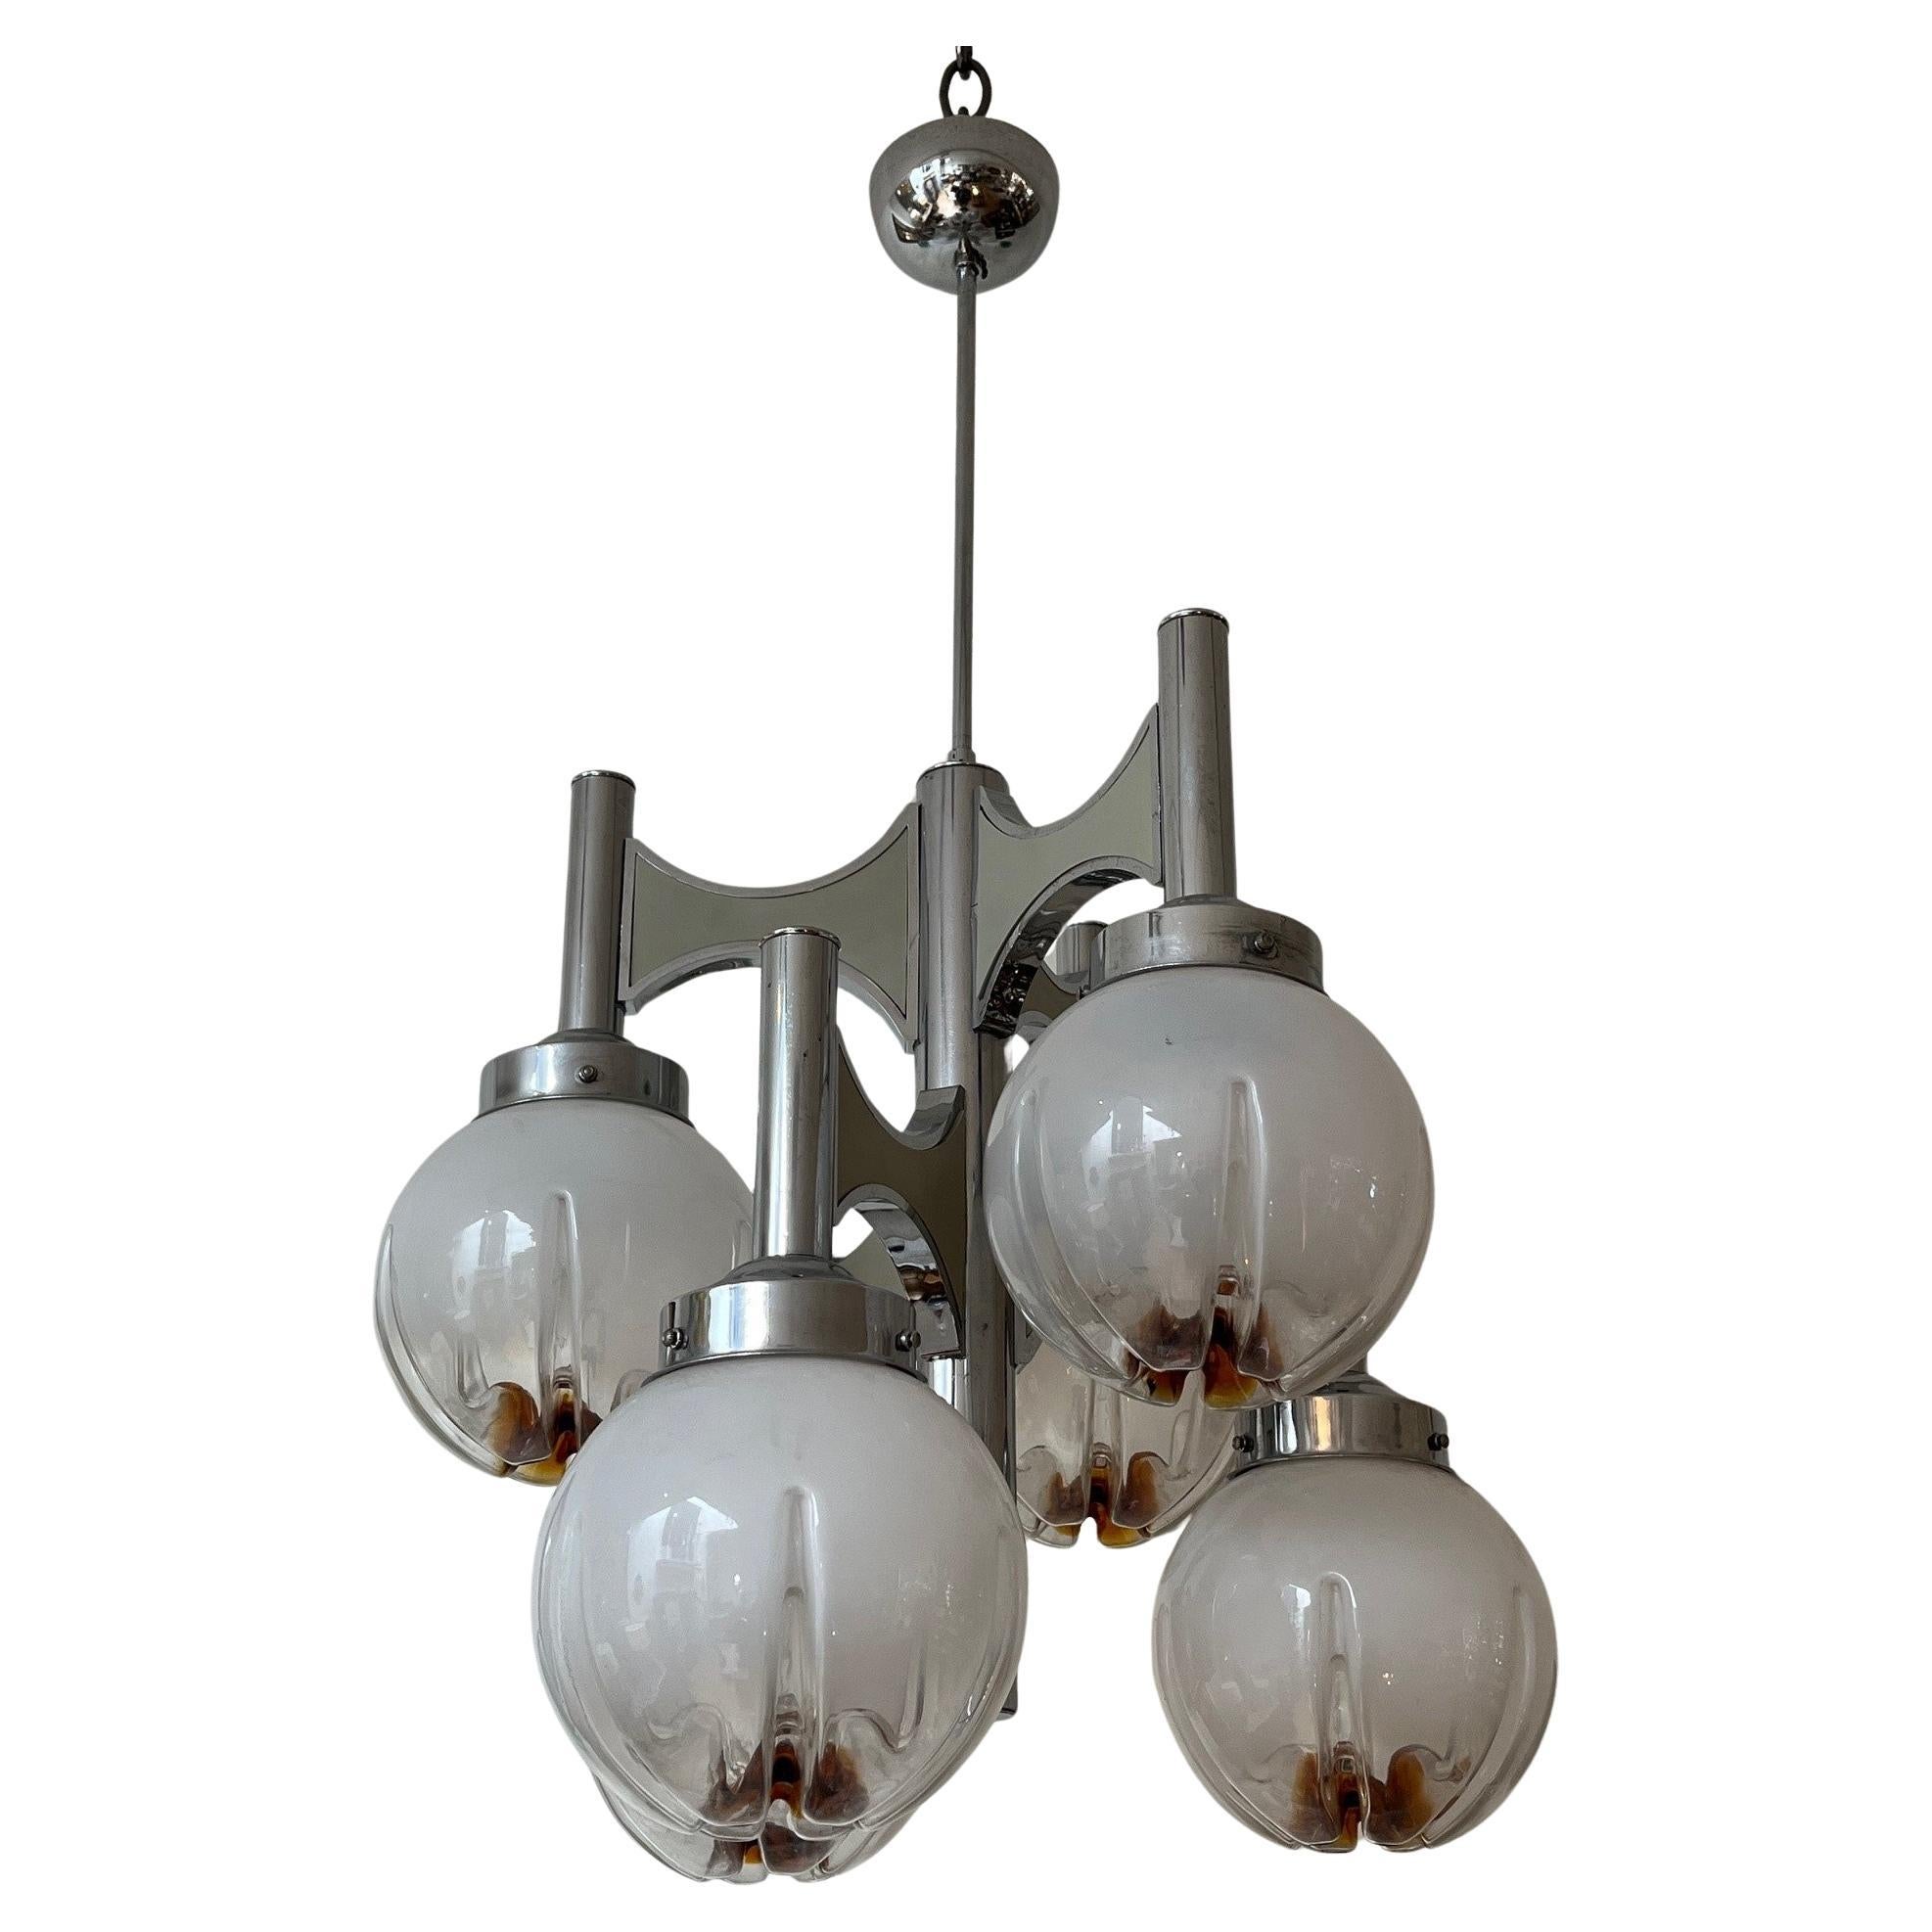 Vintage French Chrome and Glass Globes Chandelier